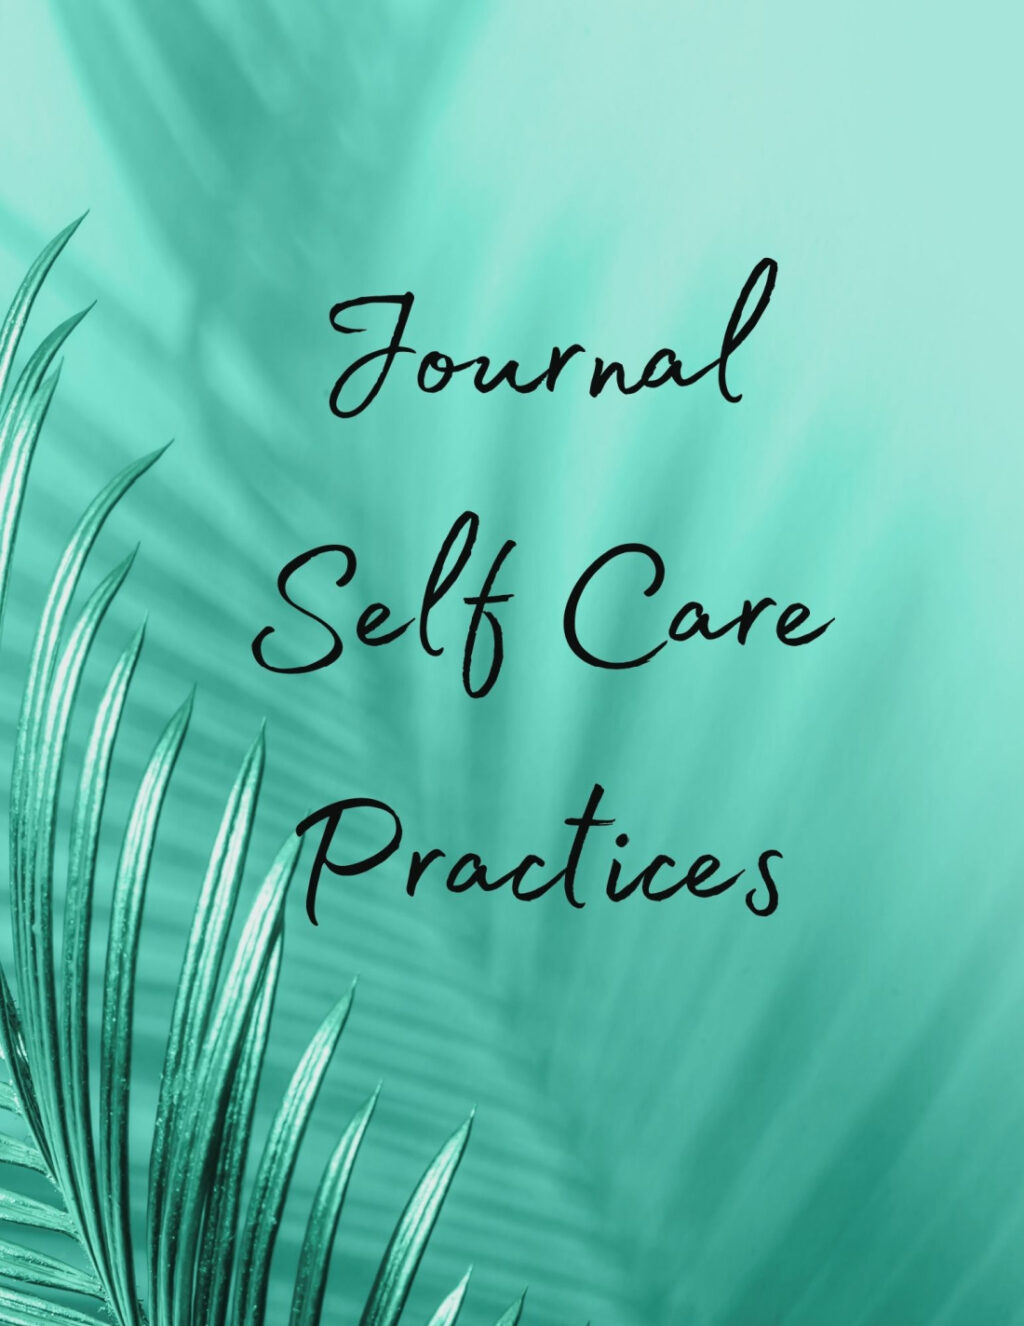 21 Journal Prompts for Self-Reflection